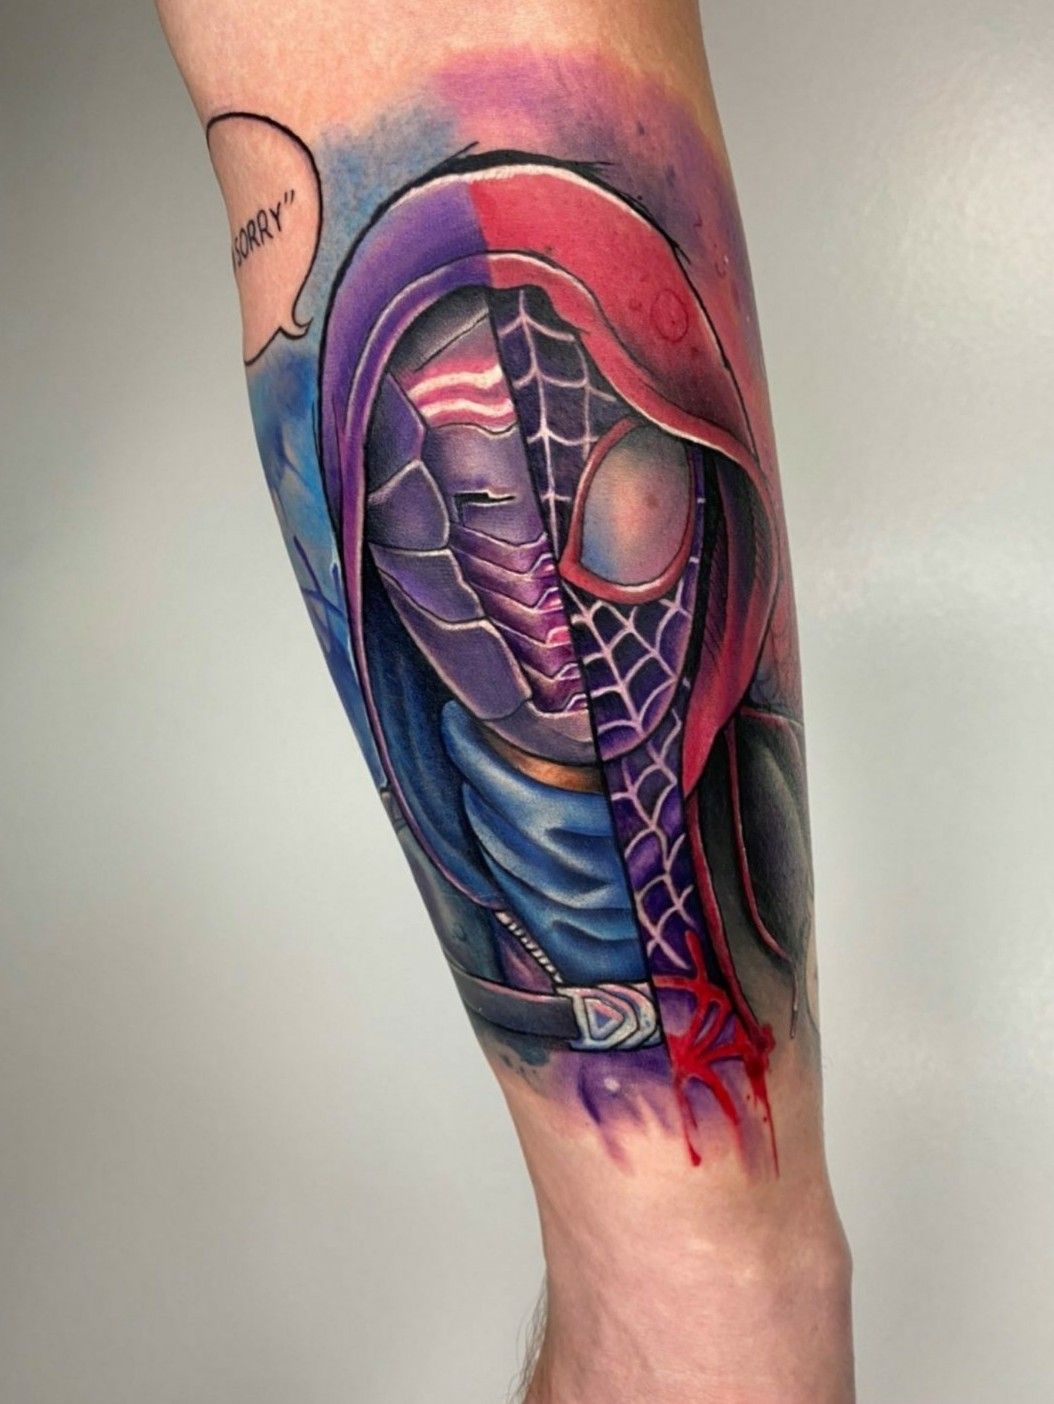 studio evoLve tattoo VA Beach on Instagram Tattoo by Zitman zitman  Super fun Miles morales SpiderMan tattoo today Loved it popping out from  shirt sleeve Ready when you are for